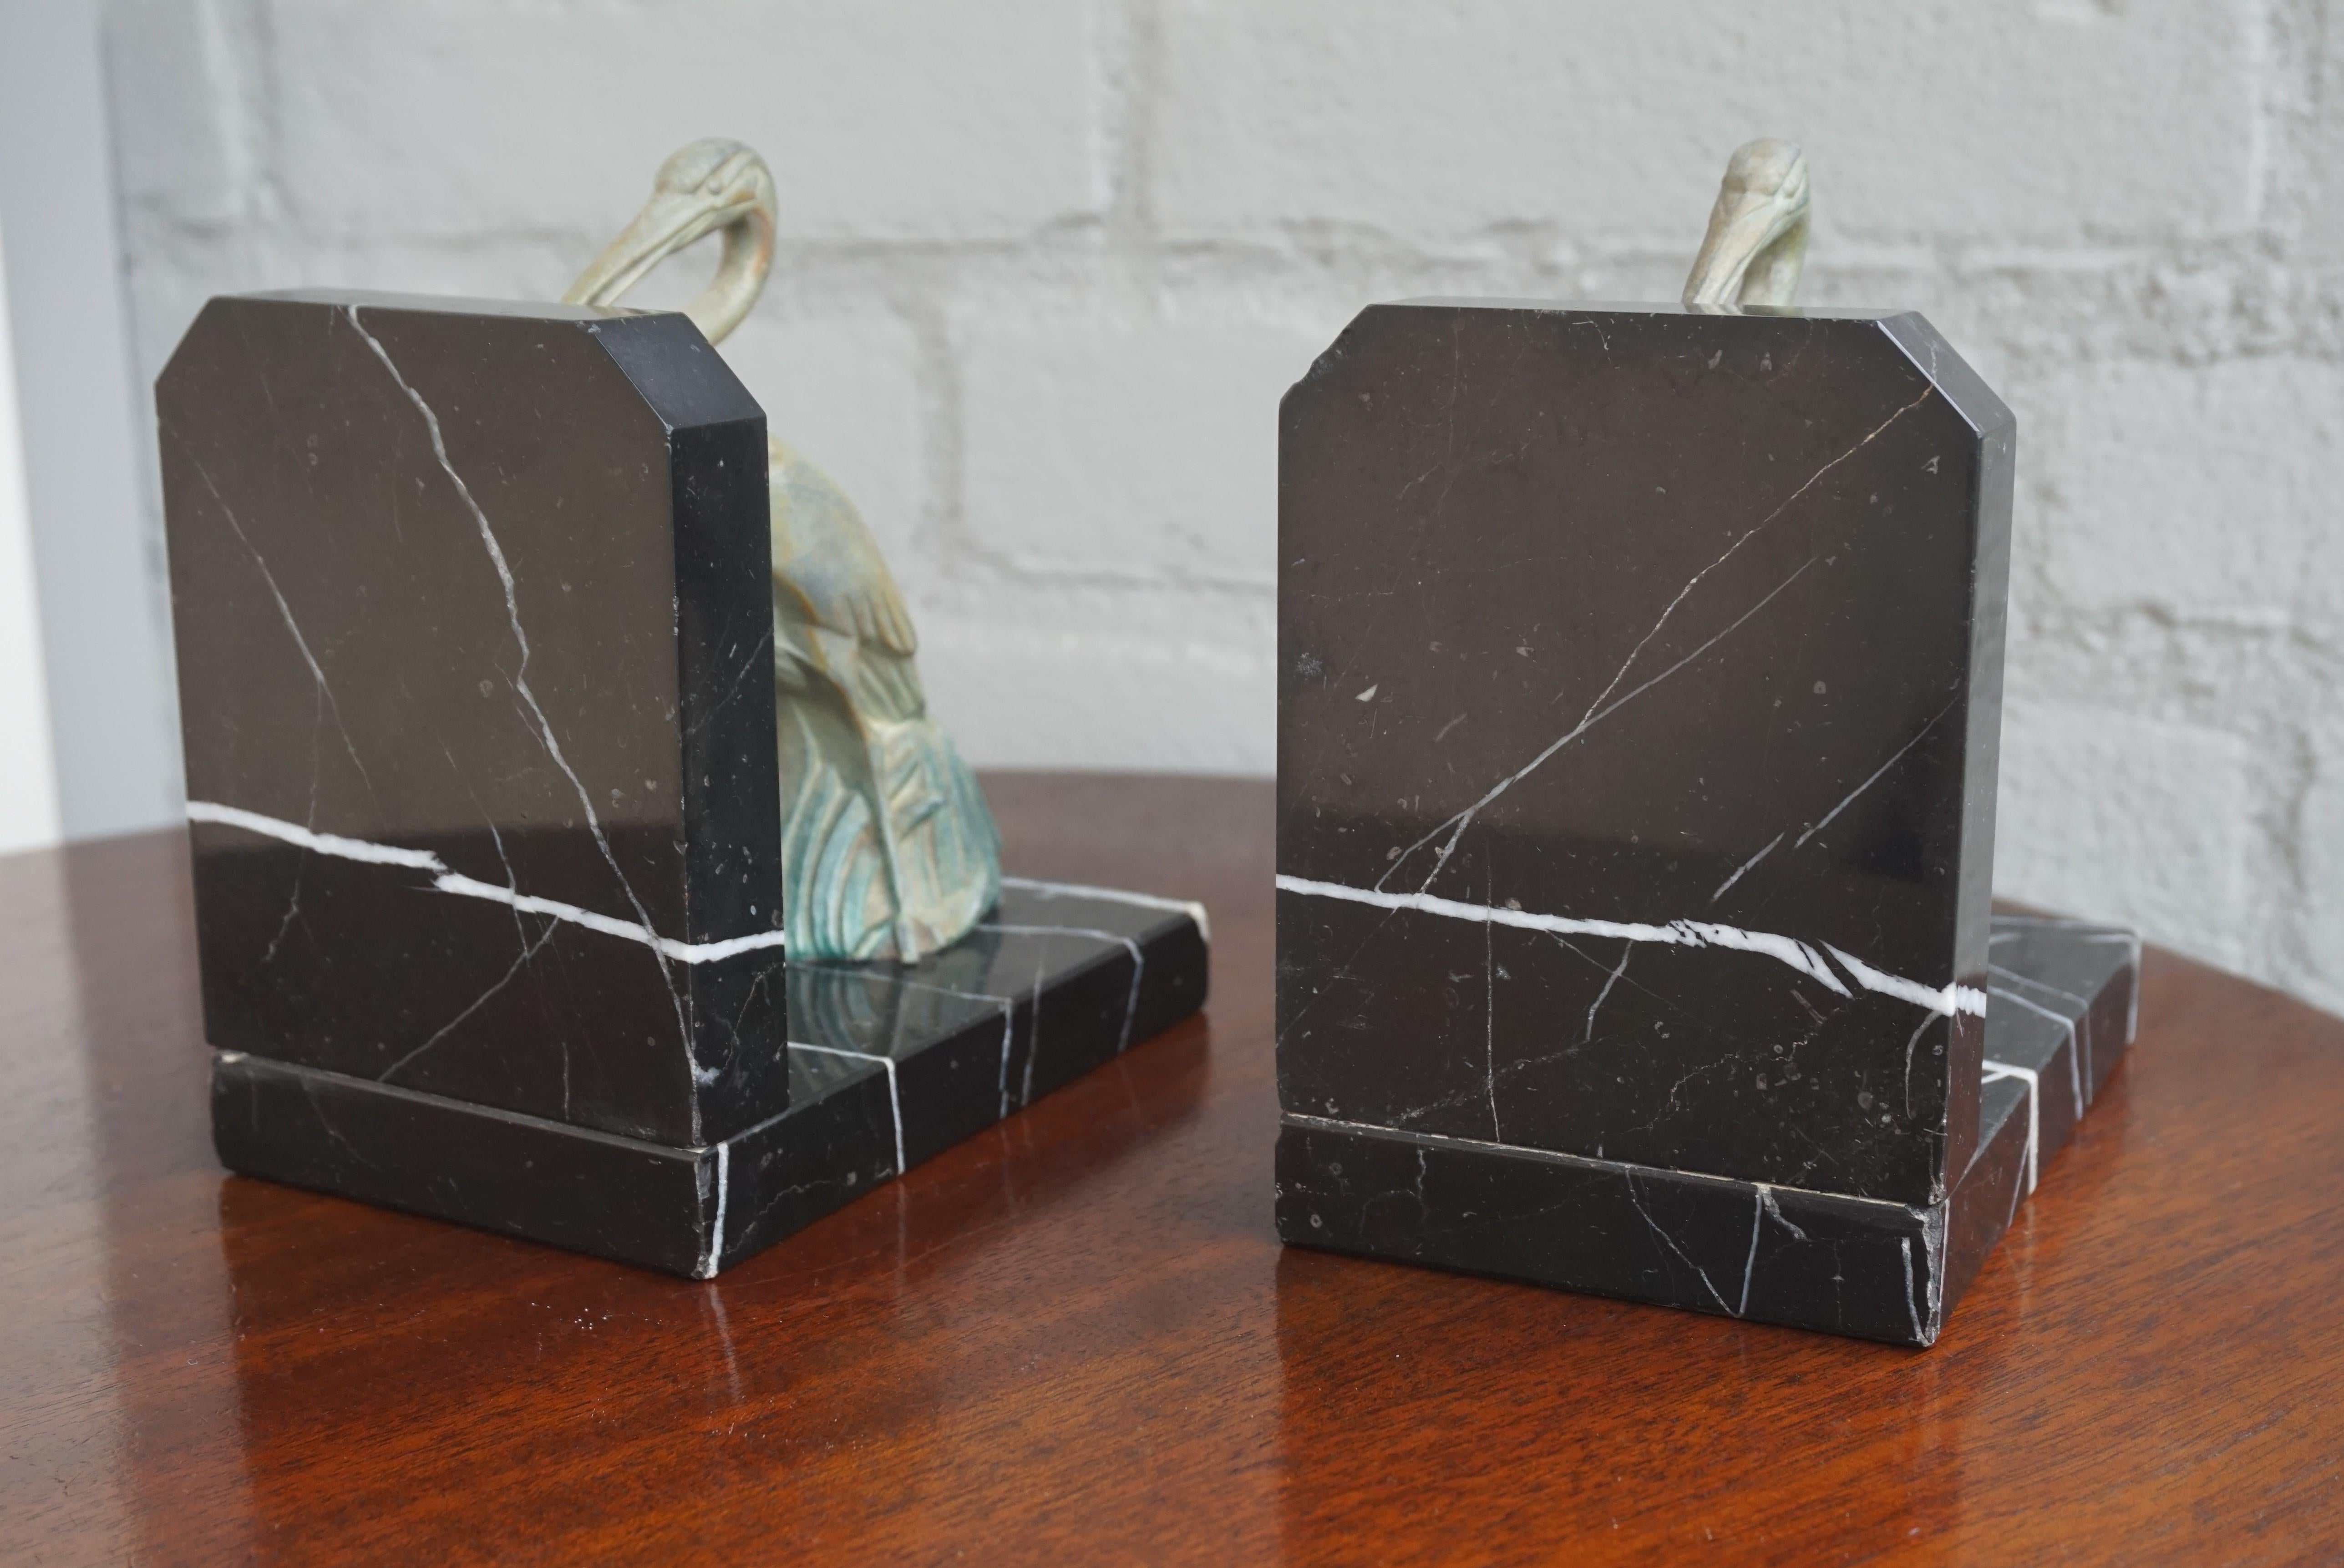 Antique Pair of Art Deco Bookends with Max Le Verrier Style Stork Sculptures 5